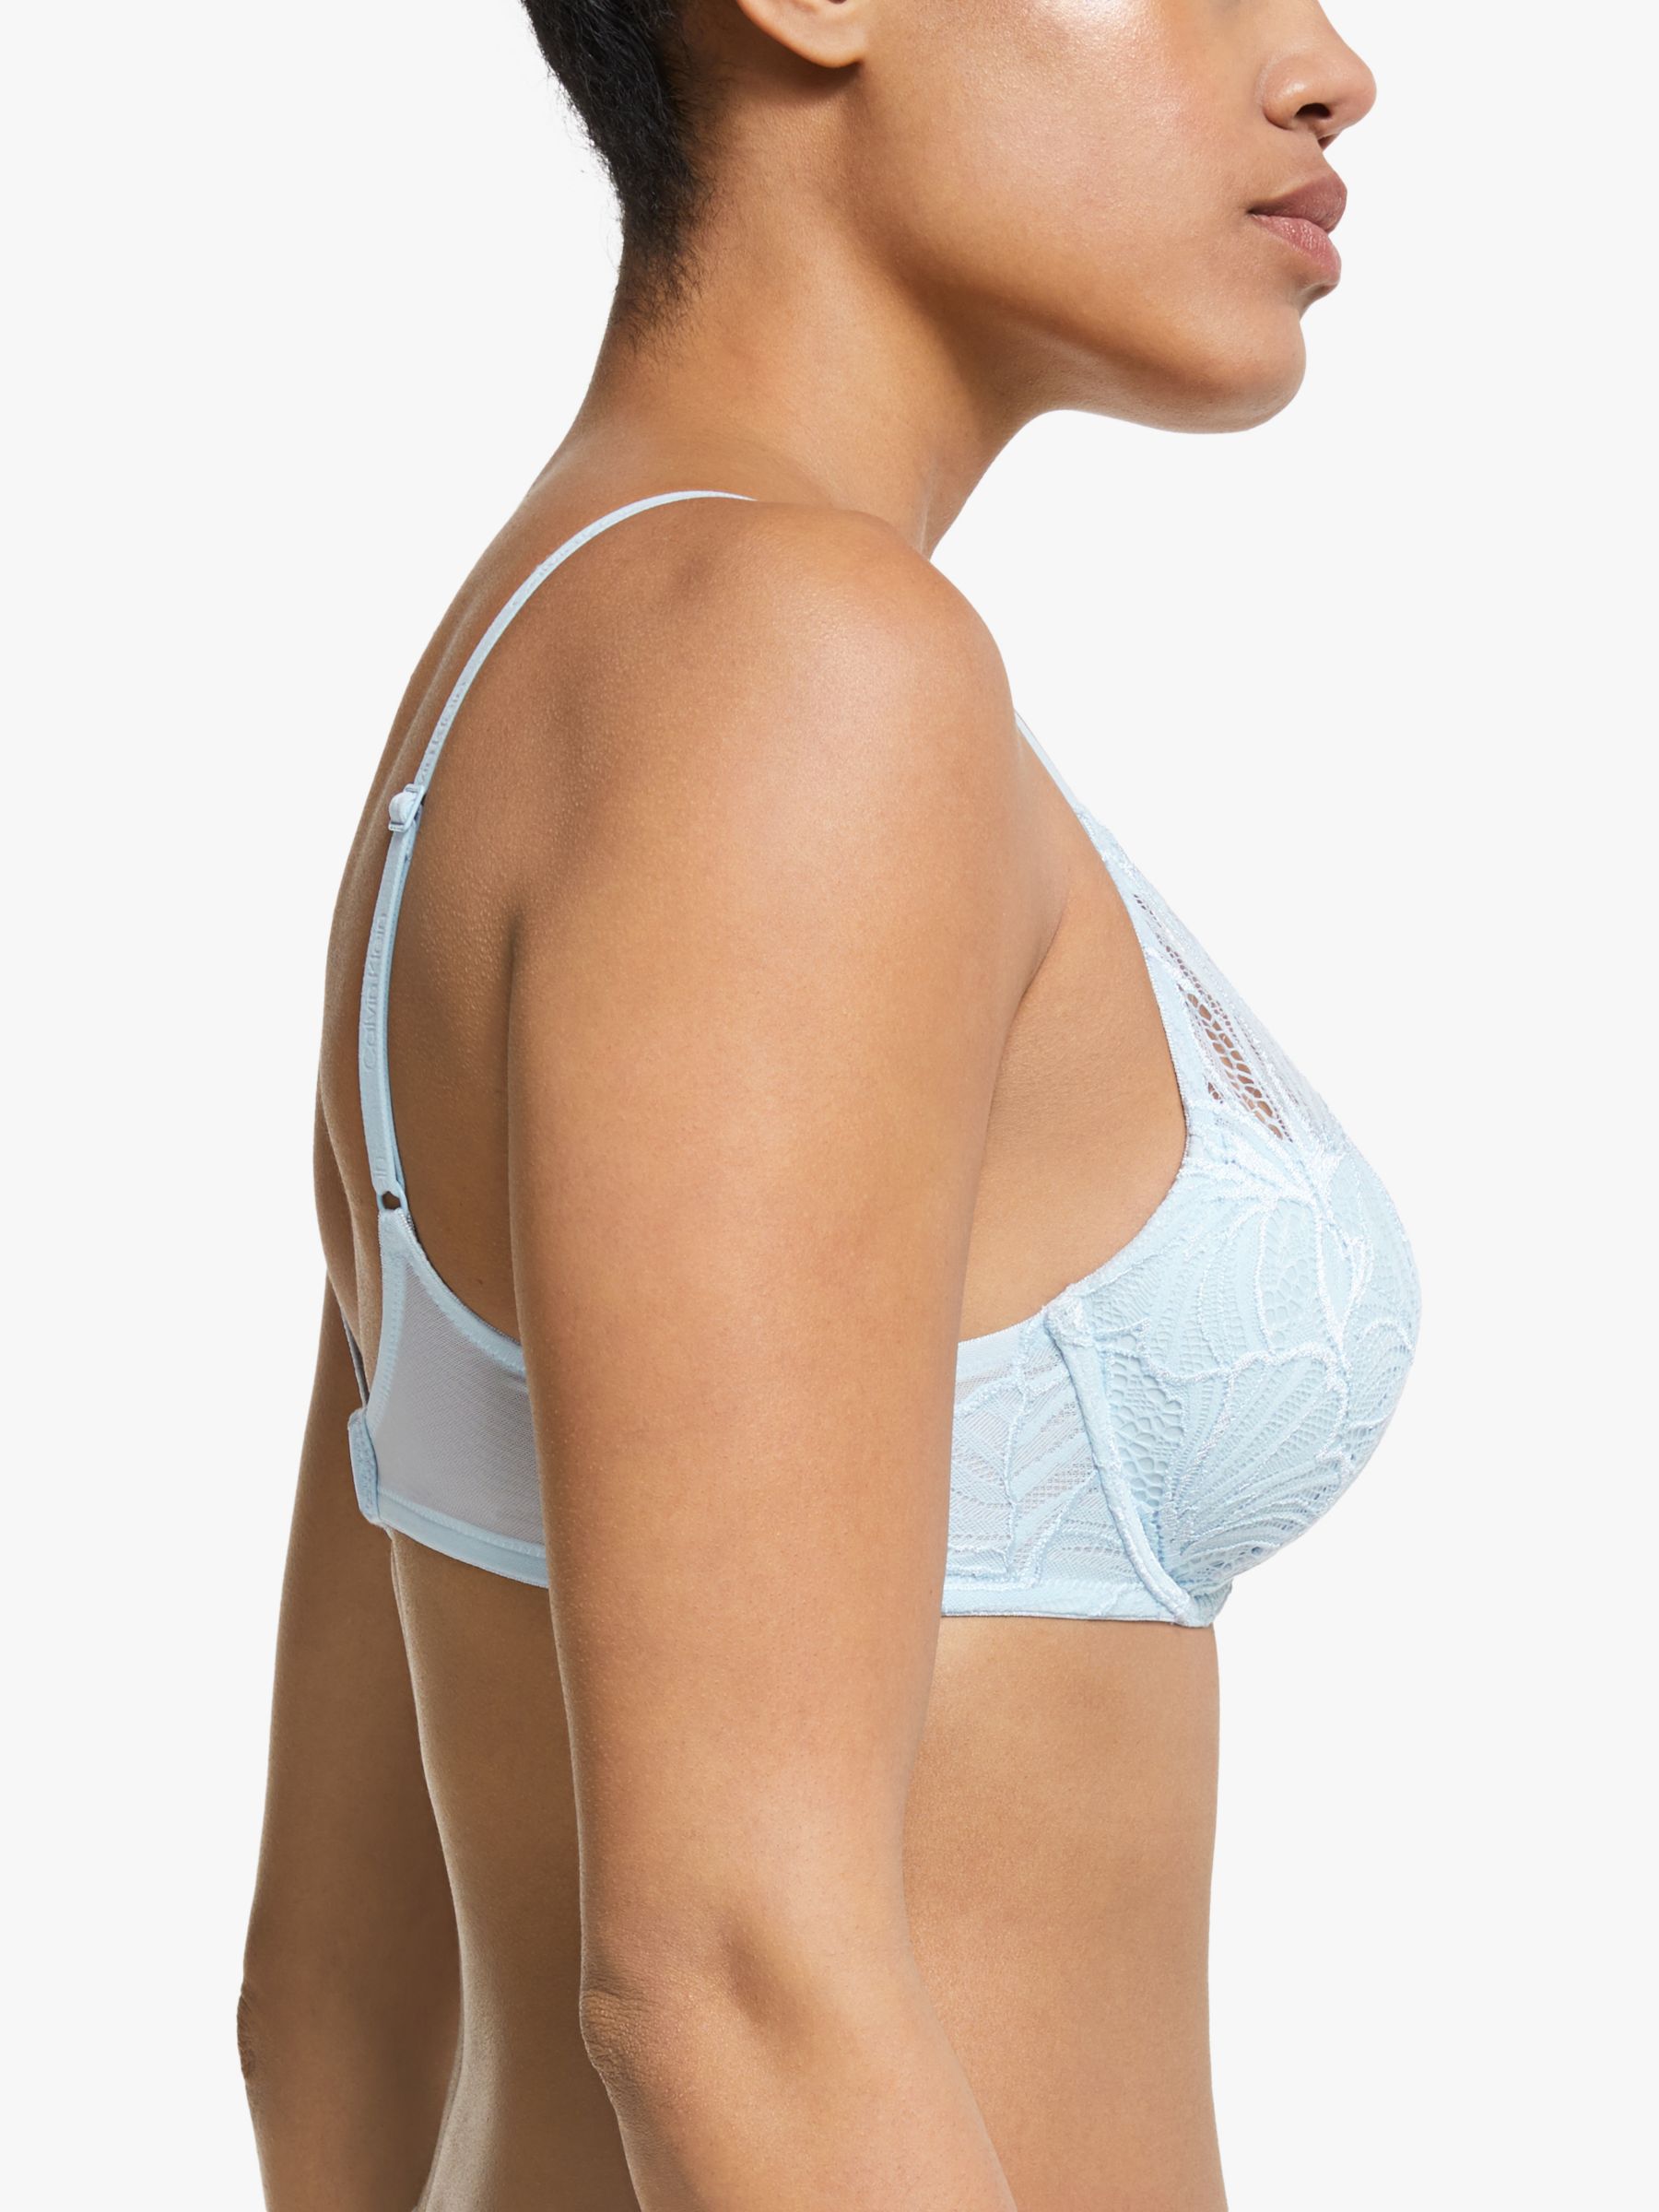 Calvin Klein Perfectly Fits Iris Lace Bra in Blue